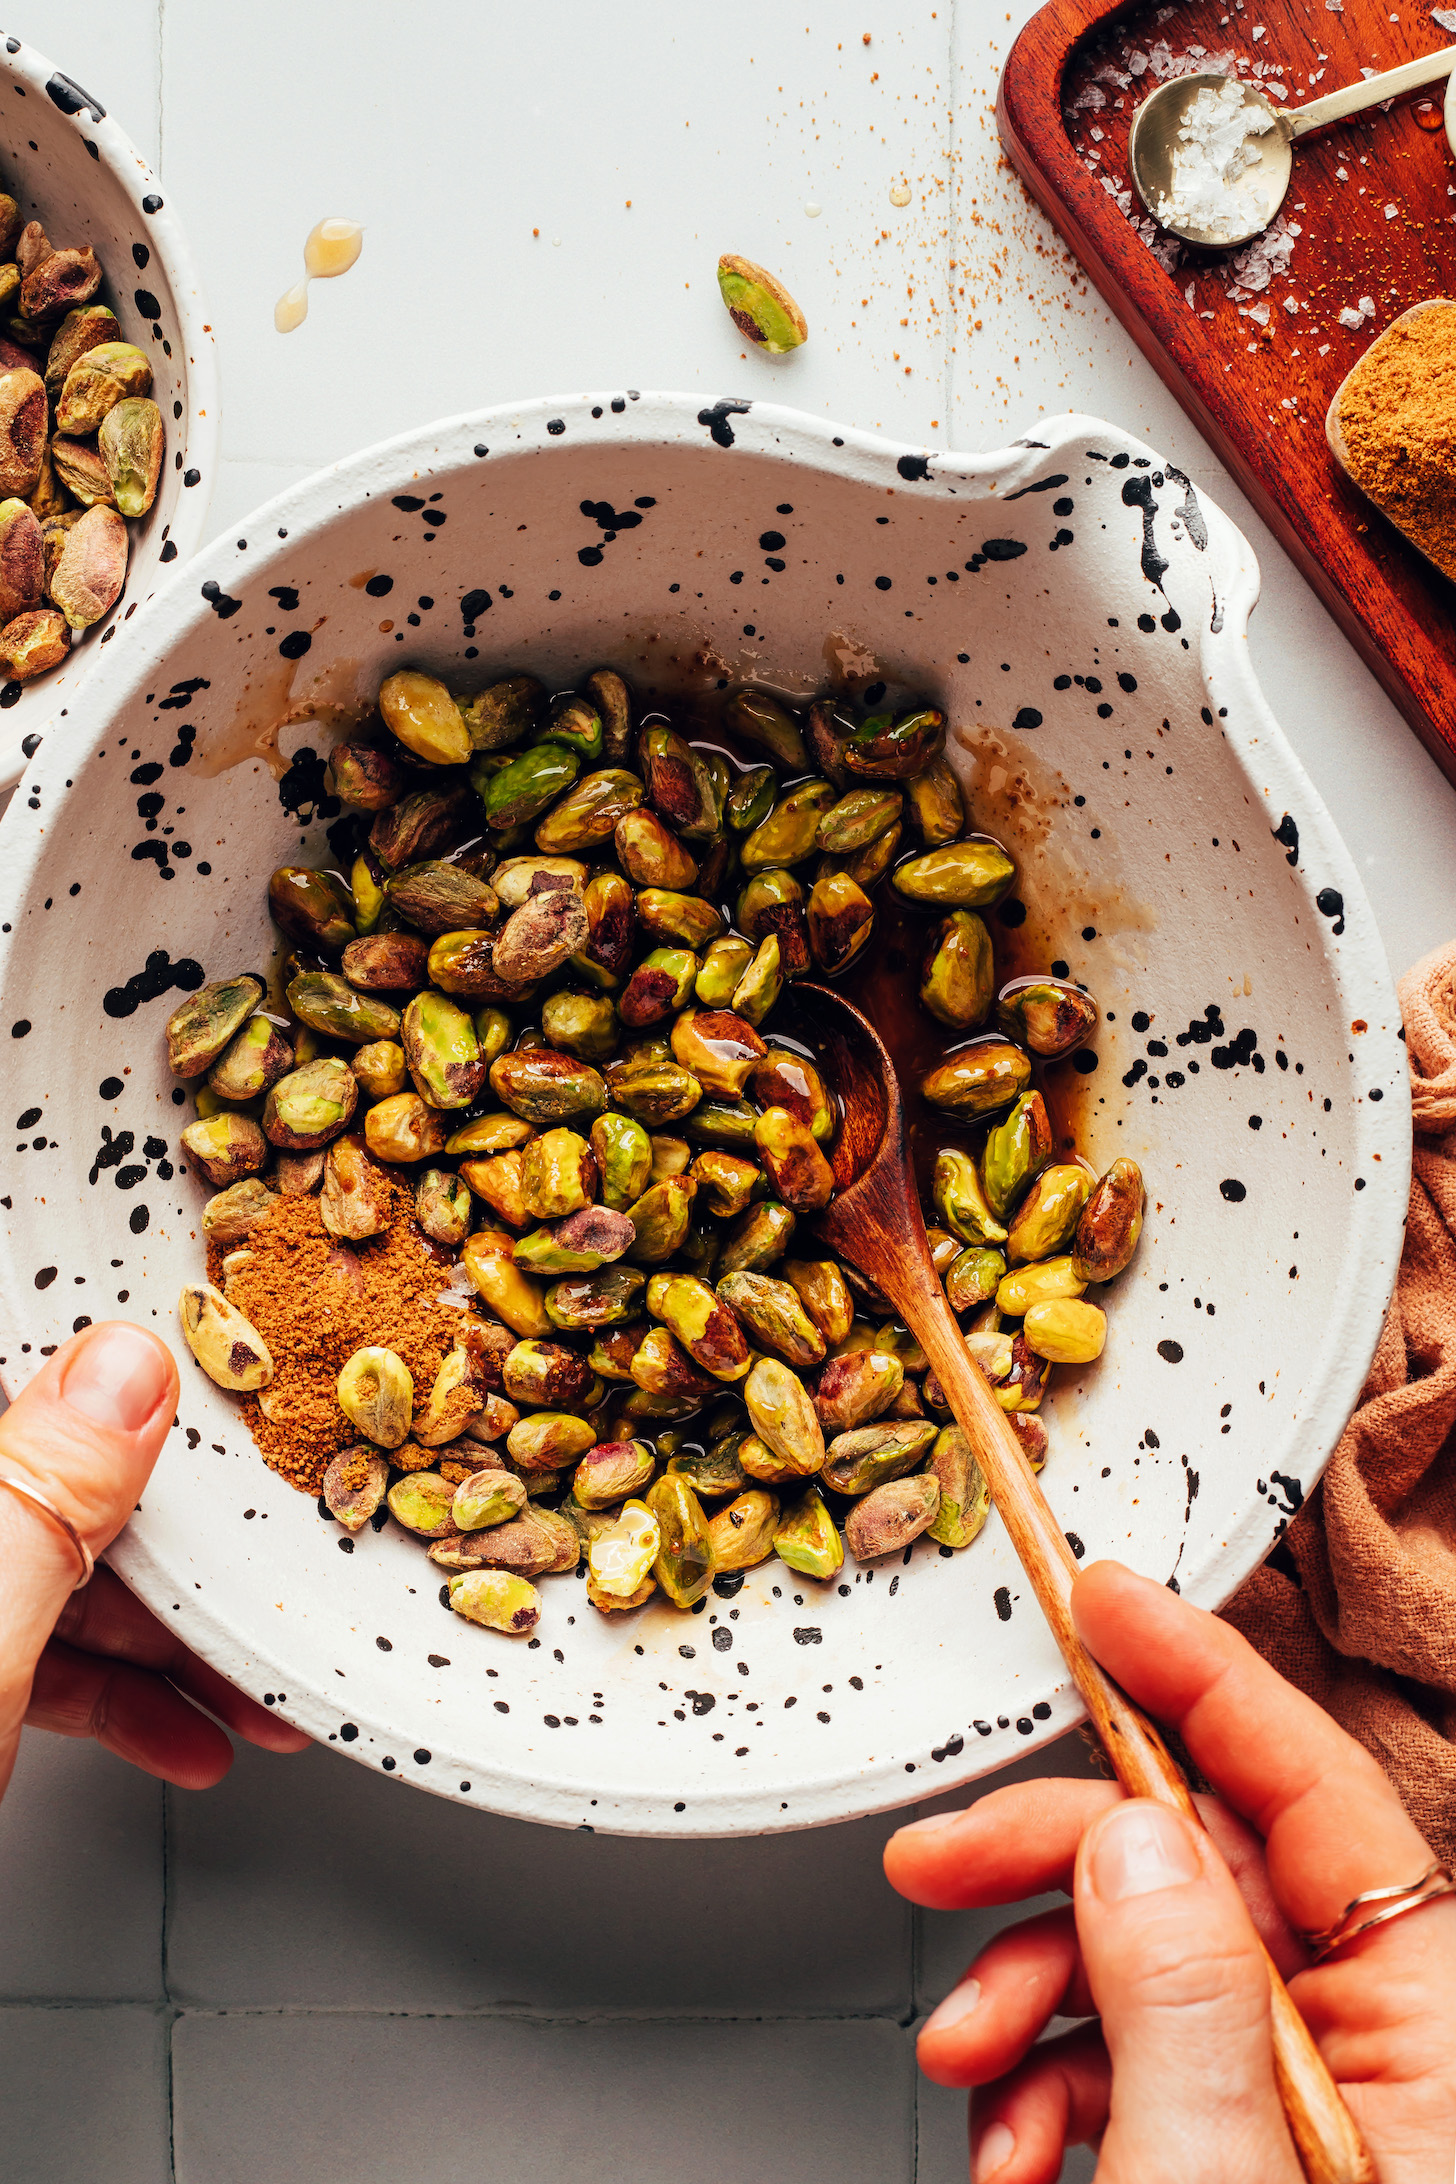 Stirring together pistachios with maple syrup and coconut sugar